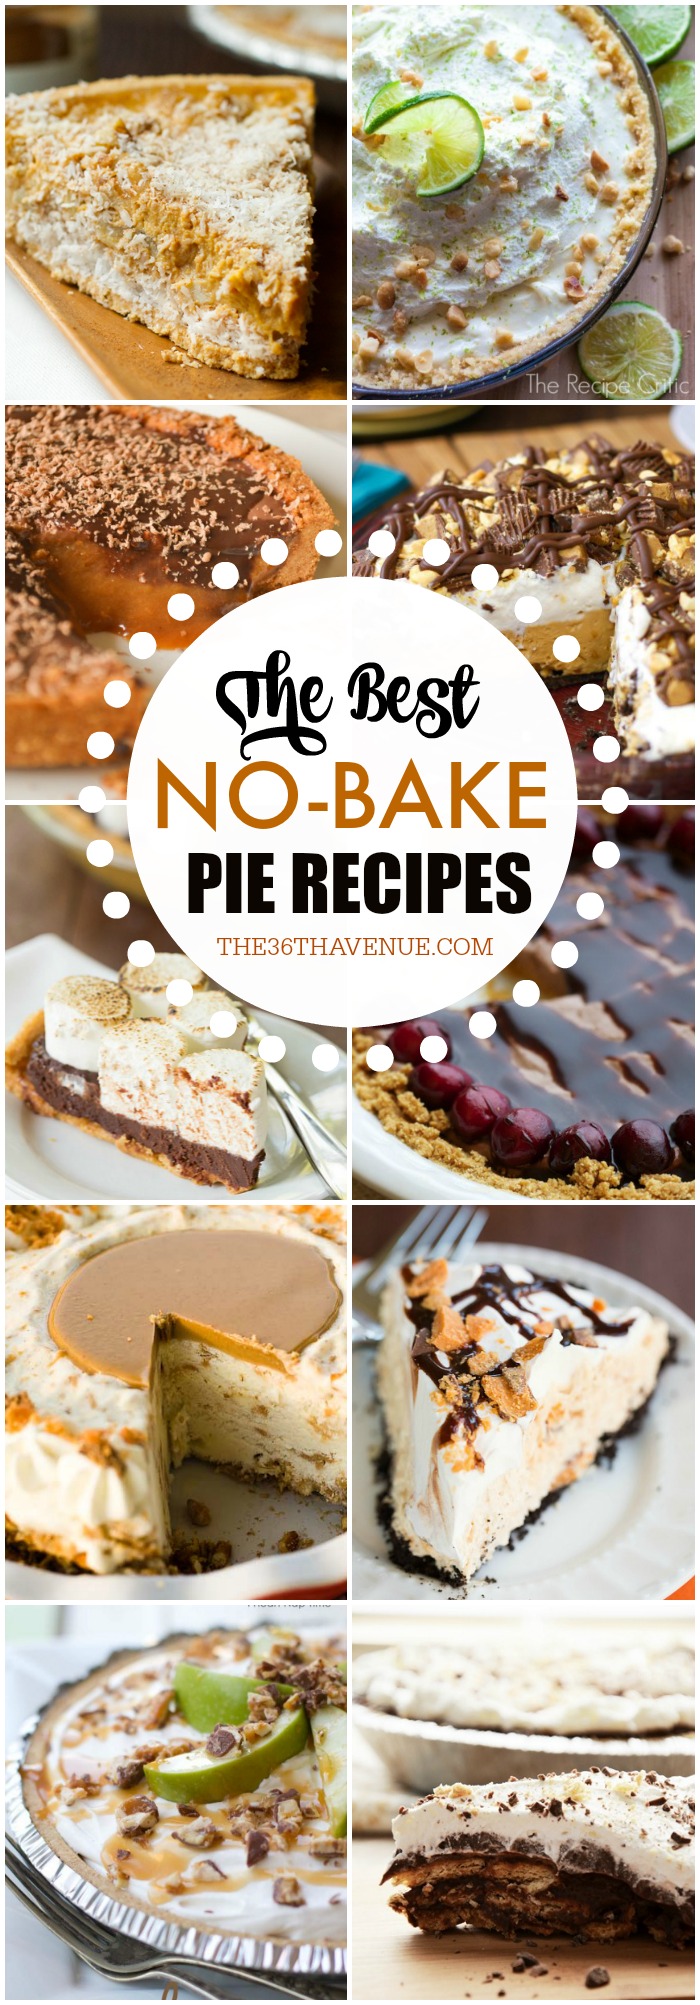 No Bake Pie Recipes - Fall recipes are the best and these NO BAKE PIE RECIPES are beyond delicious! Make any of these yummy pie recipes for Thanksgiving or for any time you are craving a quick and easy dessert! PIN IT NOW and make them later! 